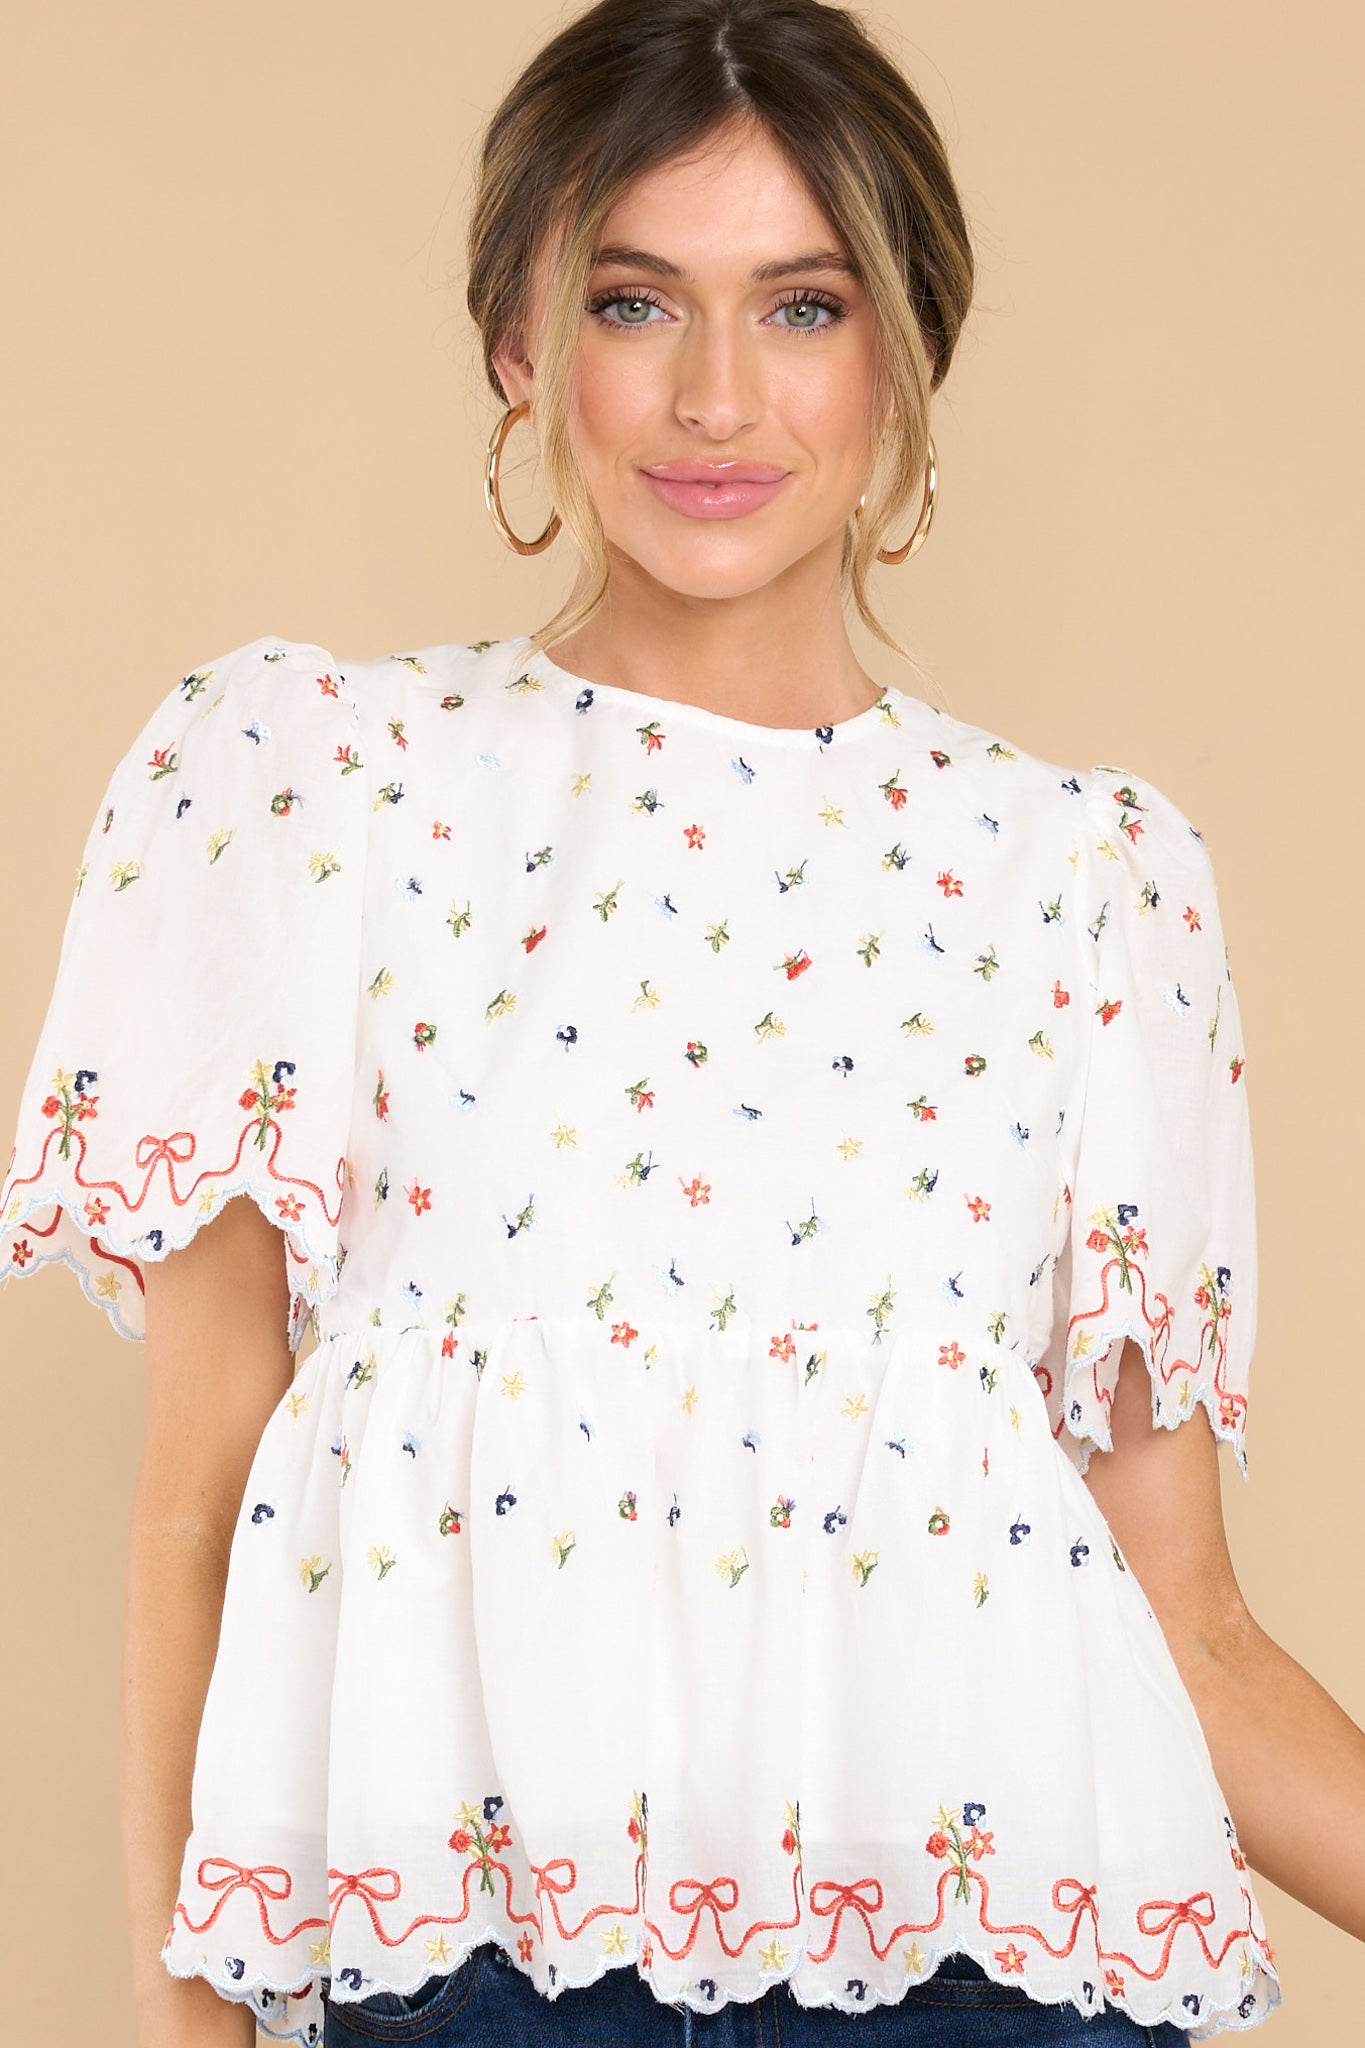 9 Sweet Beauty White Floral Embroidered Top at reddress.com